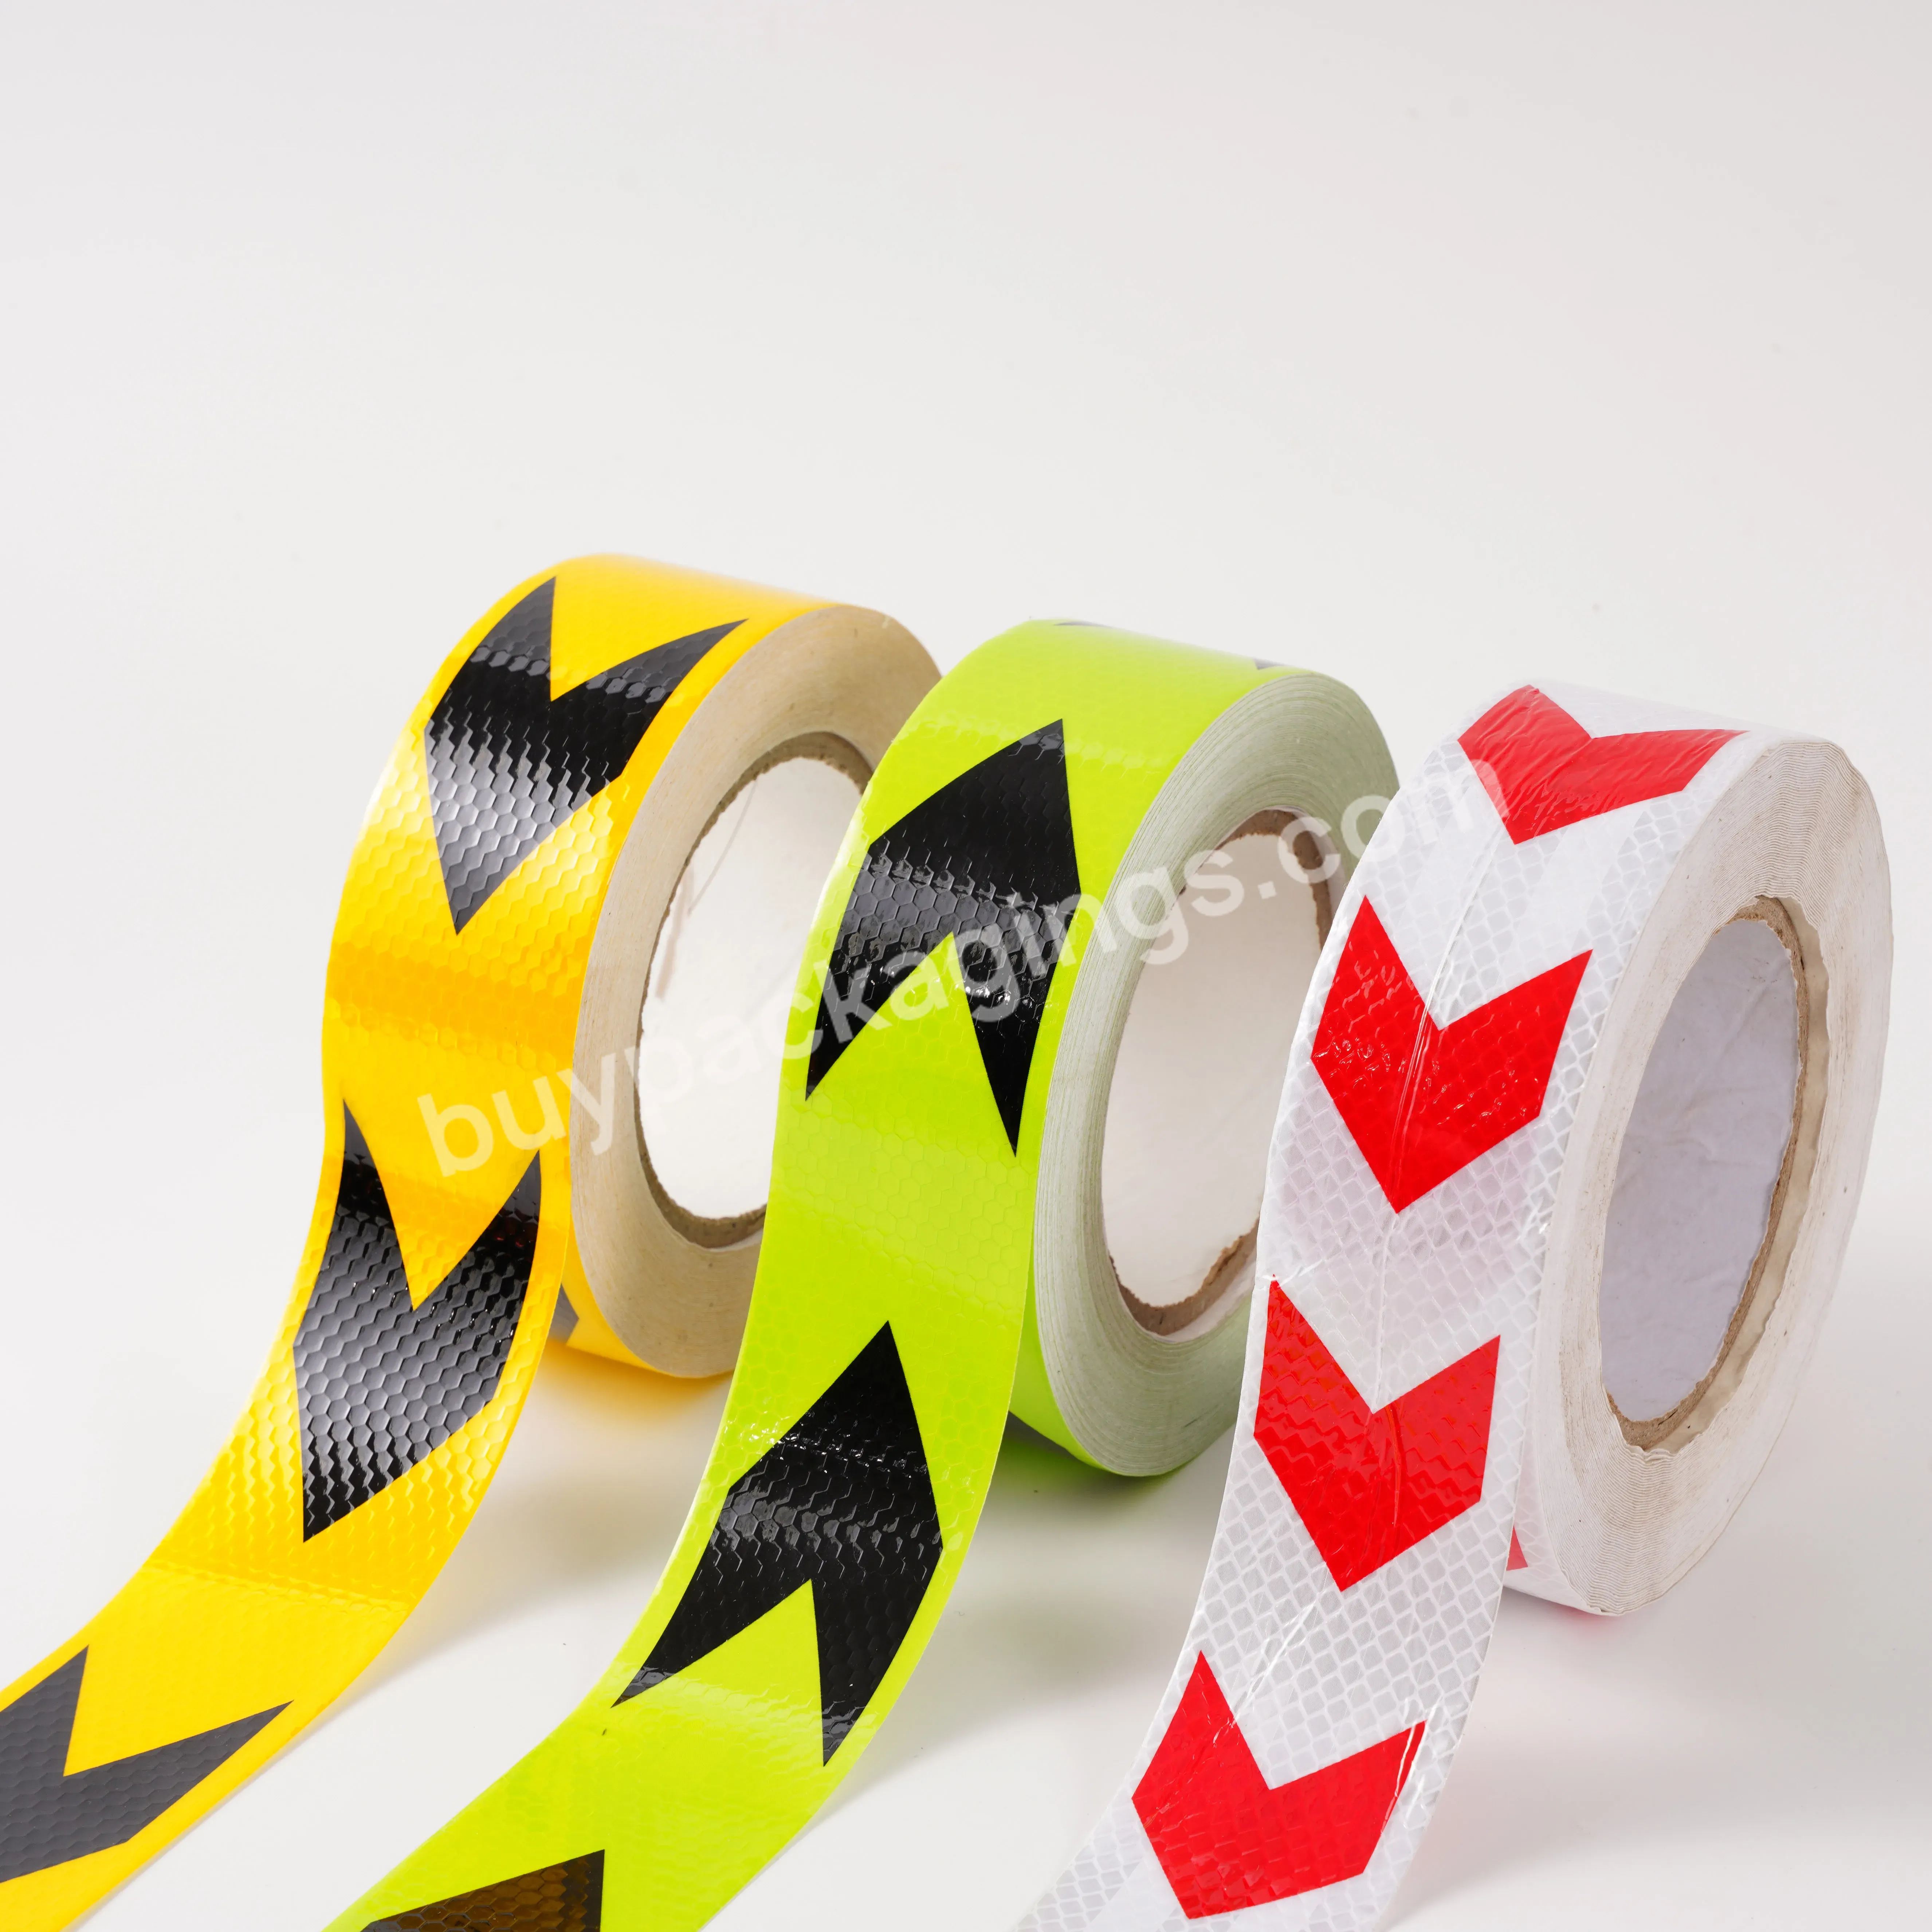 Night Road Reflective Warning Car Tape Arrow Guide Reflective Tape For High Brightness - Buy Red And Yellow Reflective Tape,Magnetic Reflective Tape,Black And White Reflective Tape.